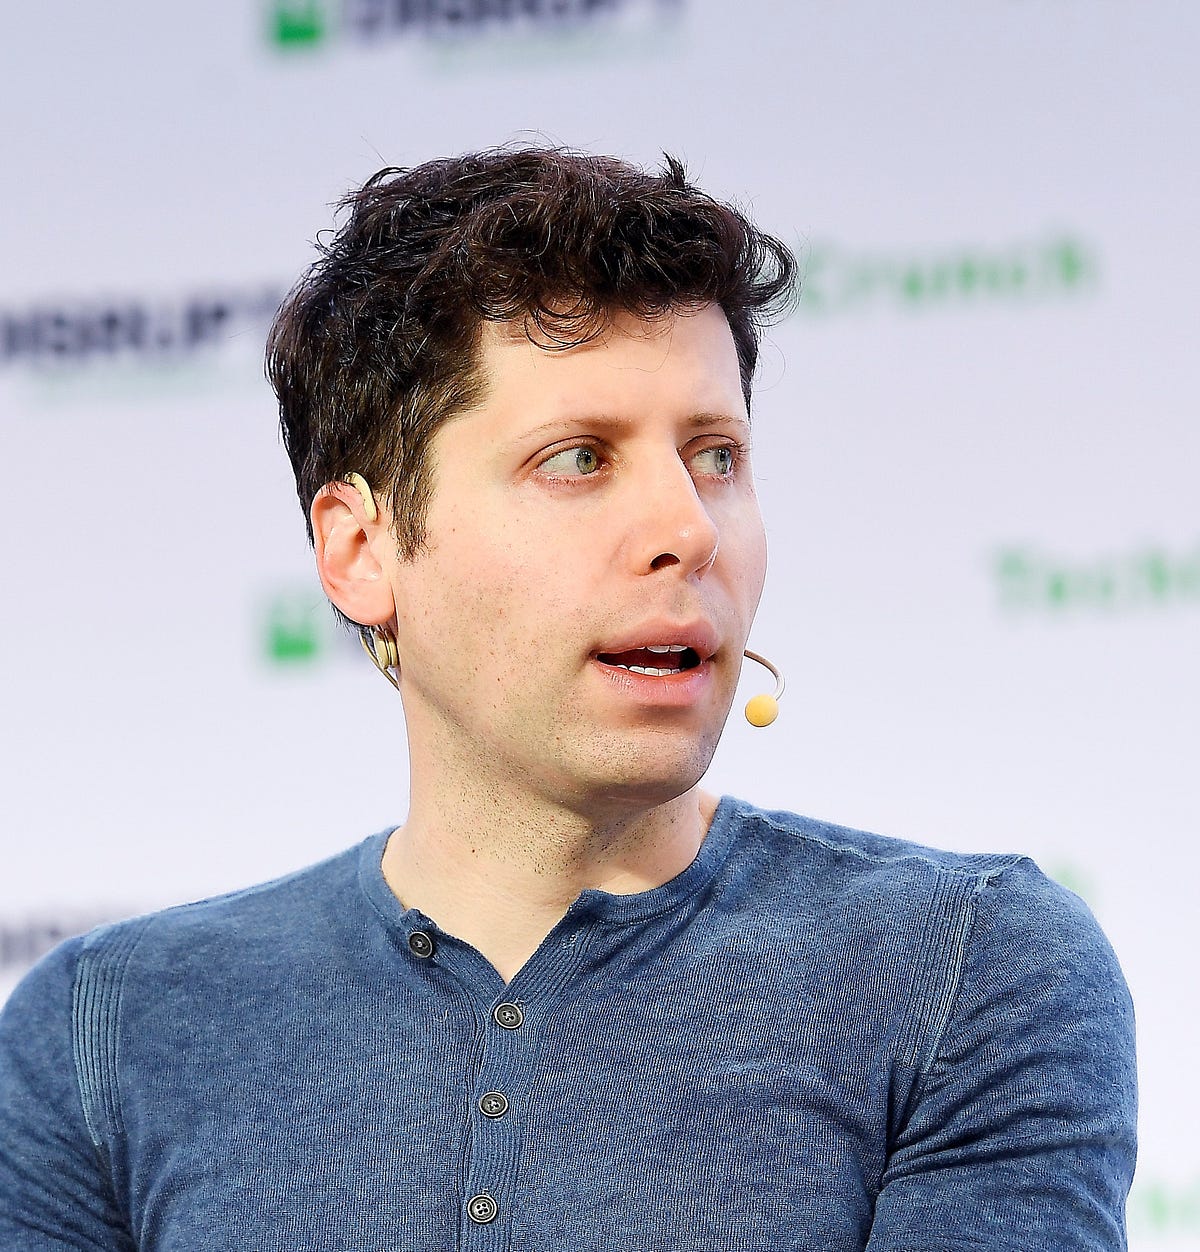 Sam Altman: The Visionary or the Hypocrite? | by P